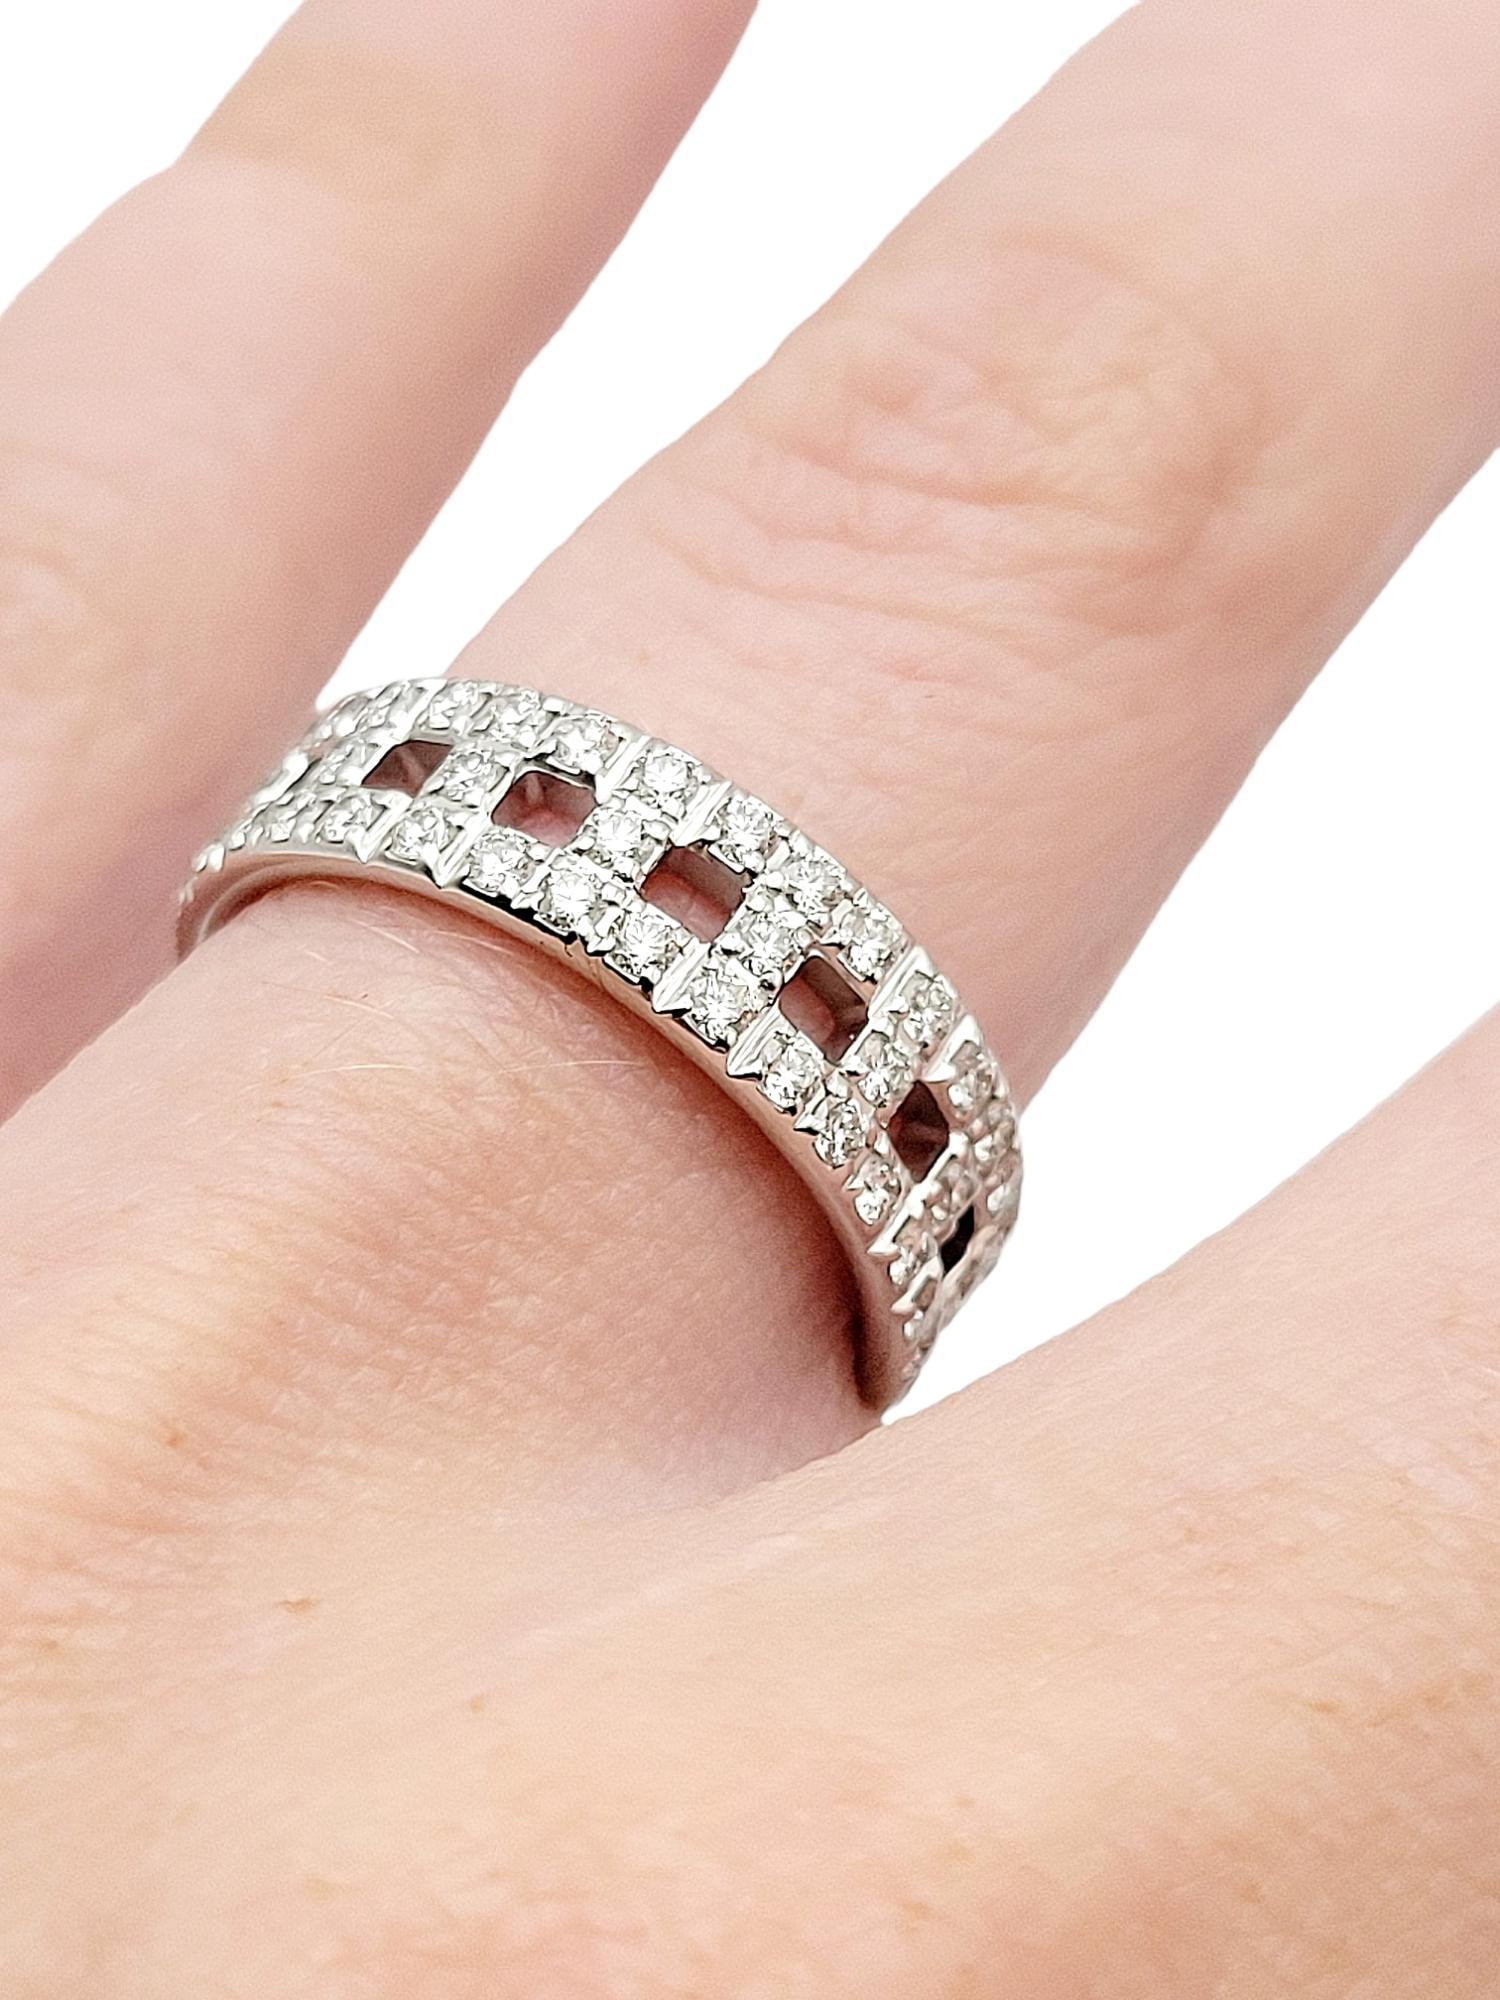 Tiffany & Co. Tiffany T True Wide Band Ring with Diamonds in 18 Karat White Gold 9